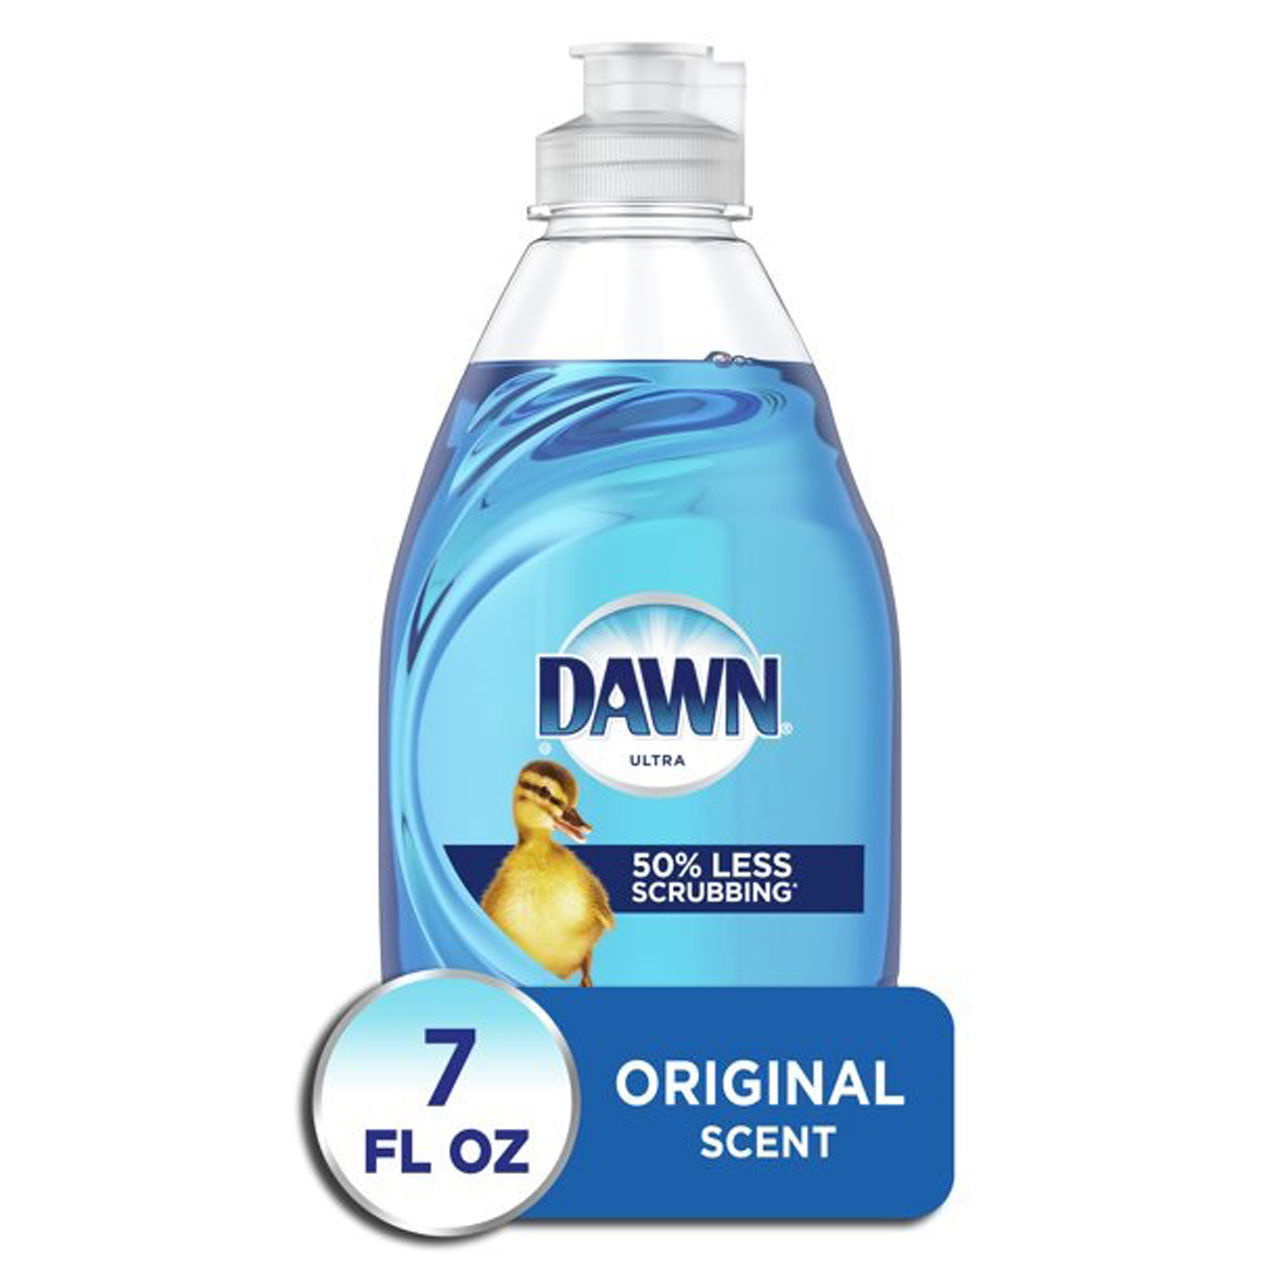 What's the scent of Dawn Liquid Dishwashing Detergent in the 18 Pack?